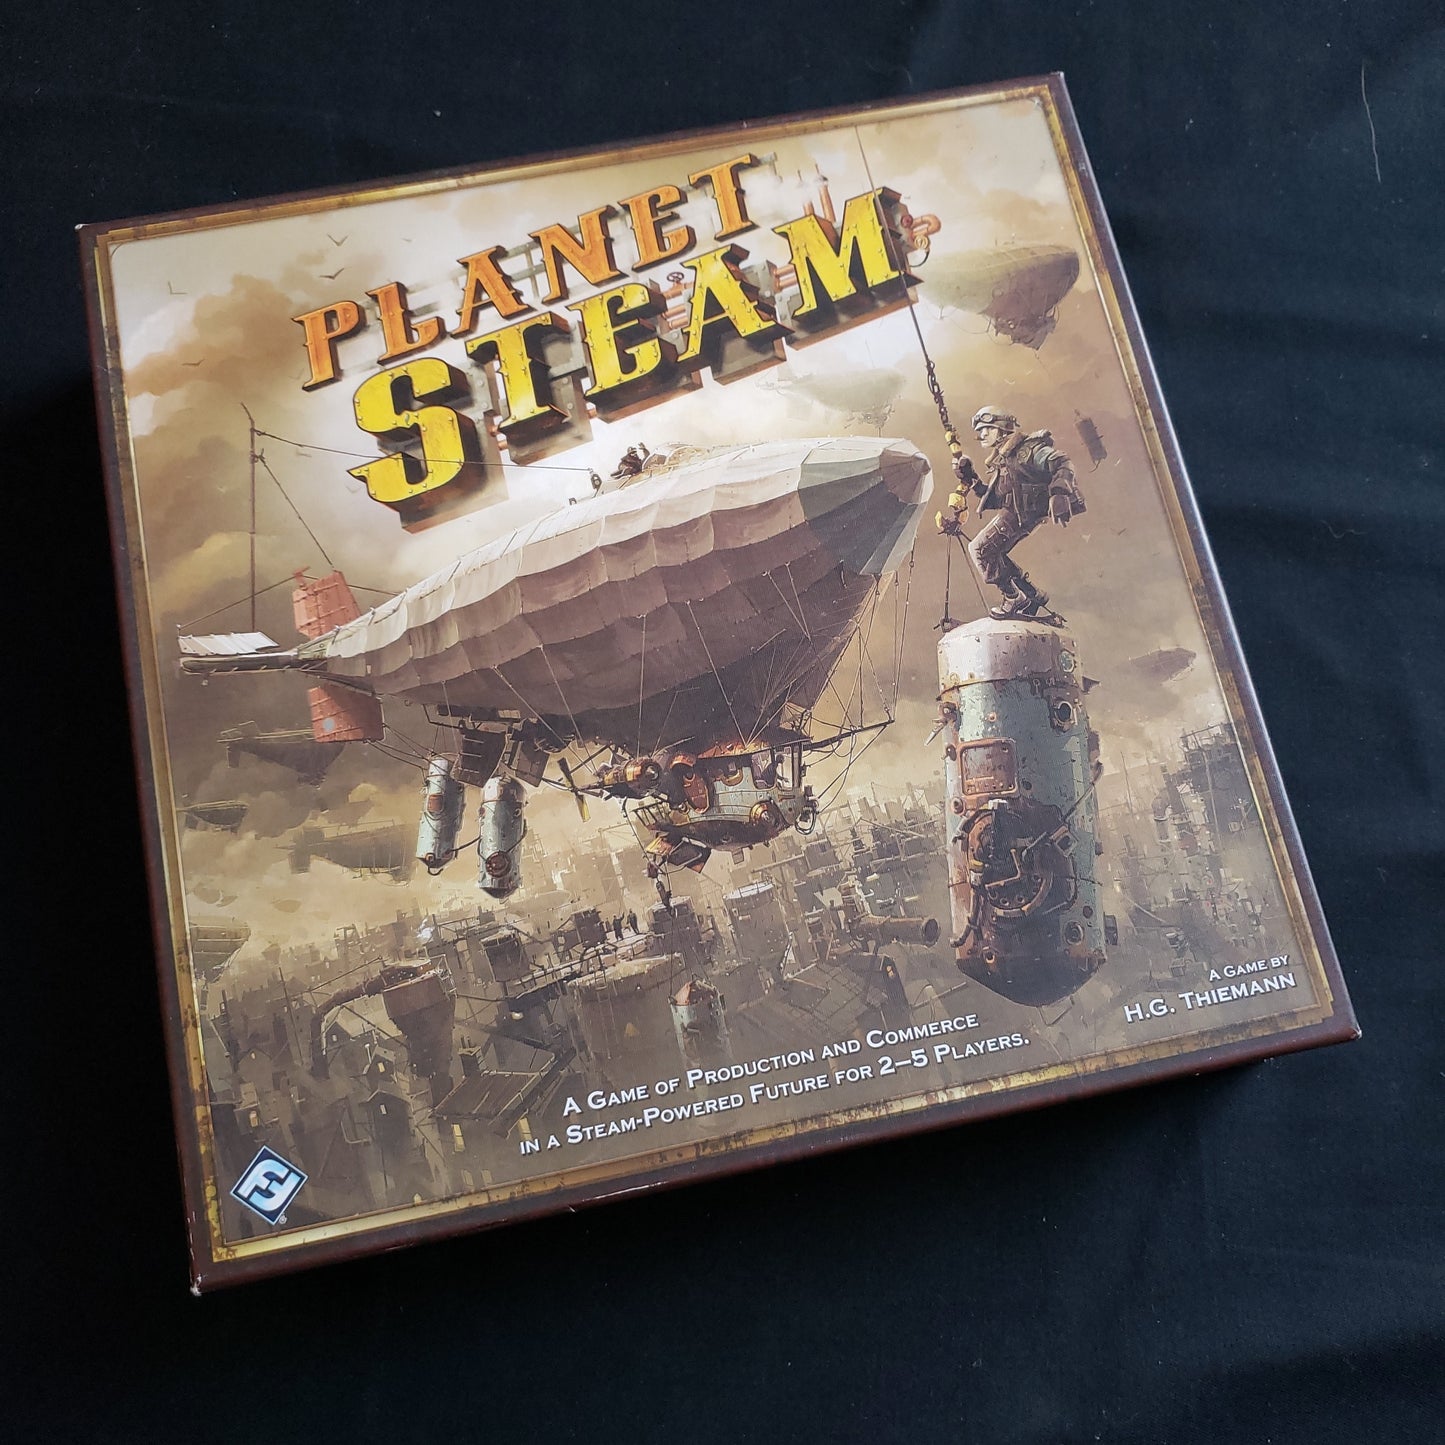 Image shows the front cover of the box of the Planet Steam board game